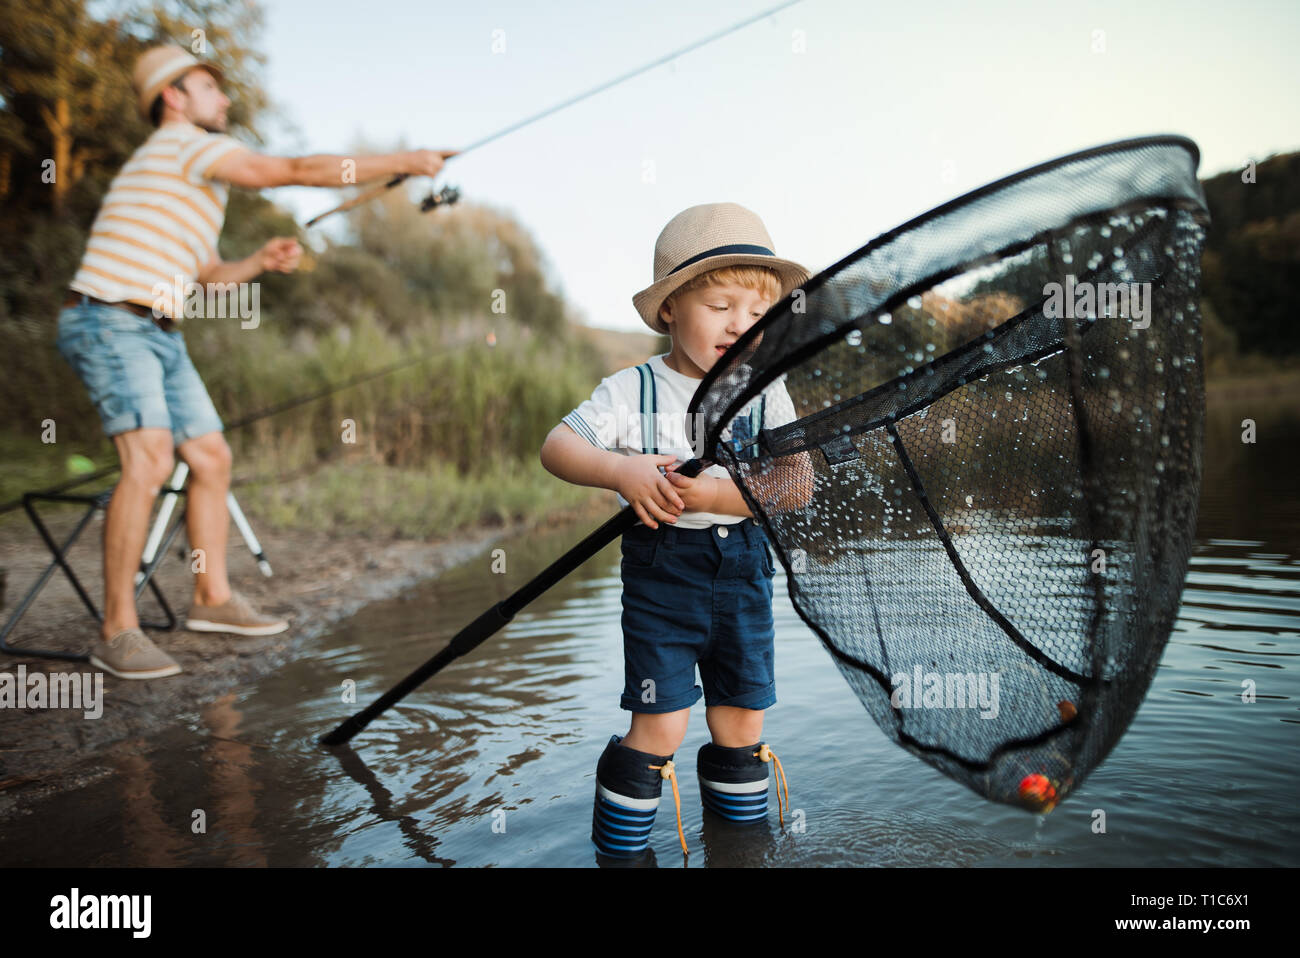 A mature father with a small toddler son outdoors fishing by a lake. Stock Photo